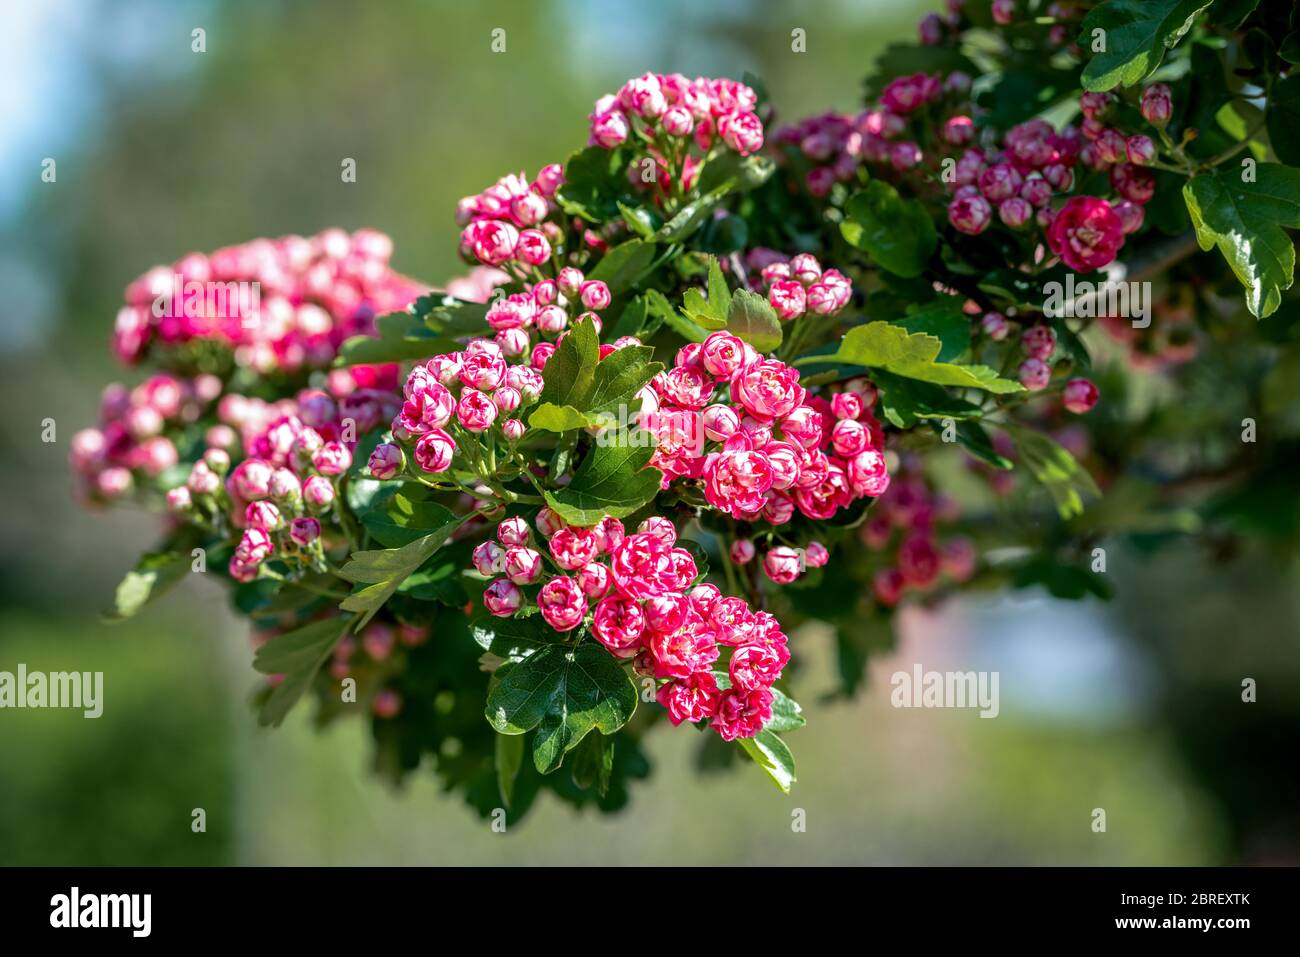 A branch full of beautiful red hawthorn (Crataegus laevigata Pauls scarlet) flowers with a green bokeh background Stock Photo